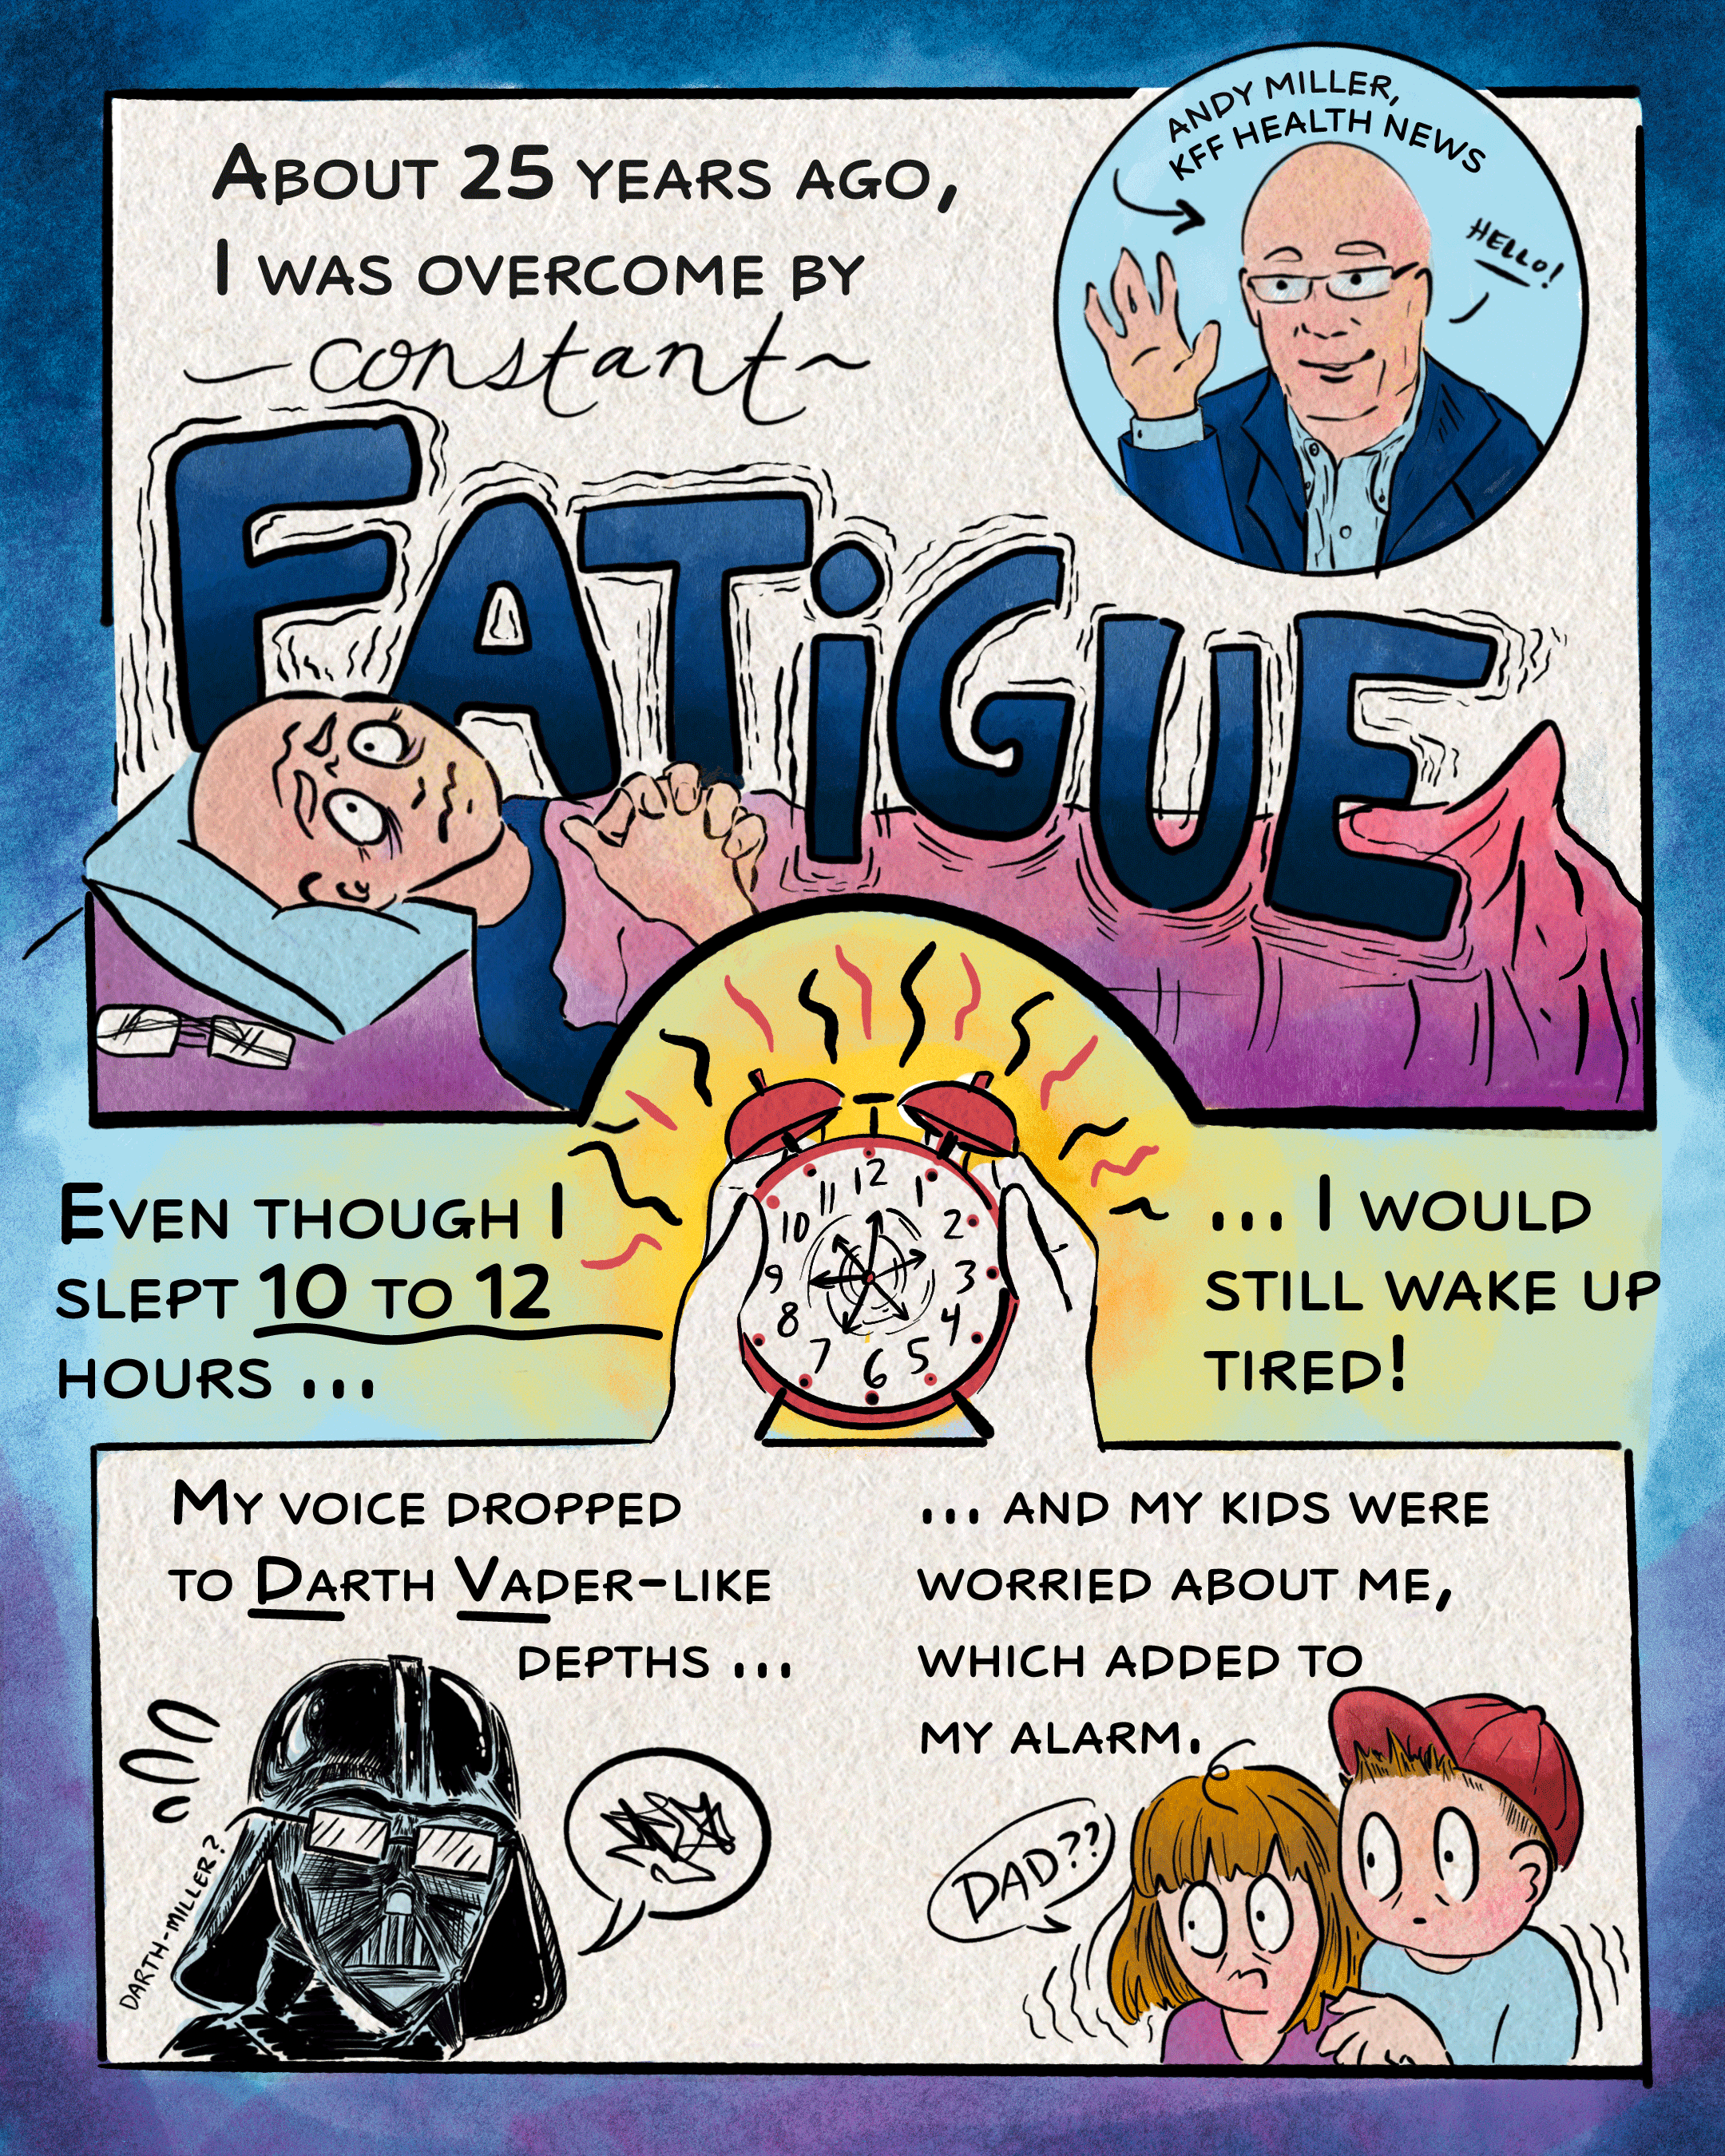 The first page of an eight-page comic about hypothyroidism. At the top of the page, a cartoon version of the reporter, Andy Miller, is introduced. He is the narrator for this series. The next panel reads “about 25 years ago, I was overcome by constant fatigue,” and shows him exhausted, lying in bed with the words “constant fatigue” weighing him down. The following panel reads, “even though I slept 10 to 12 hours a night, I would still wake up tired!” and shows him holding an alarm clock with spinning hands. The final and bottom panel reads, “my voice dropped to Darth Vader-like depths … and my kids were worried about me, which added to my alarm,” and shows, on the left, Miller as Darth Vader. On the right, his children look spooked as they observe and listen to their “dad.”